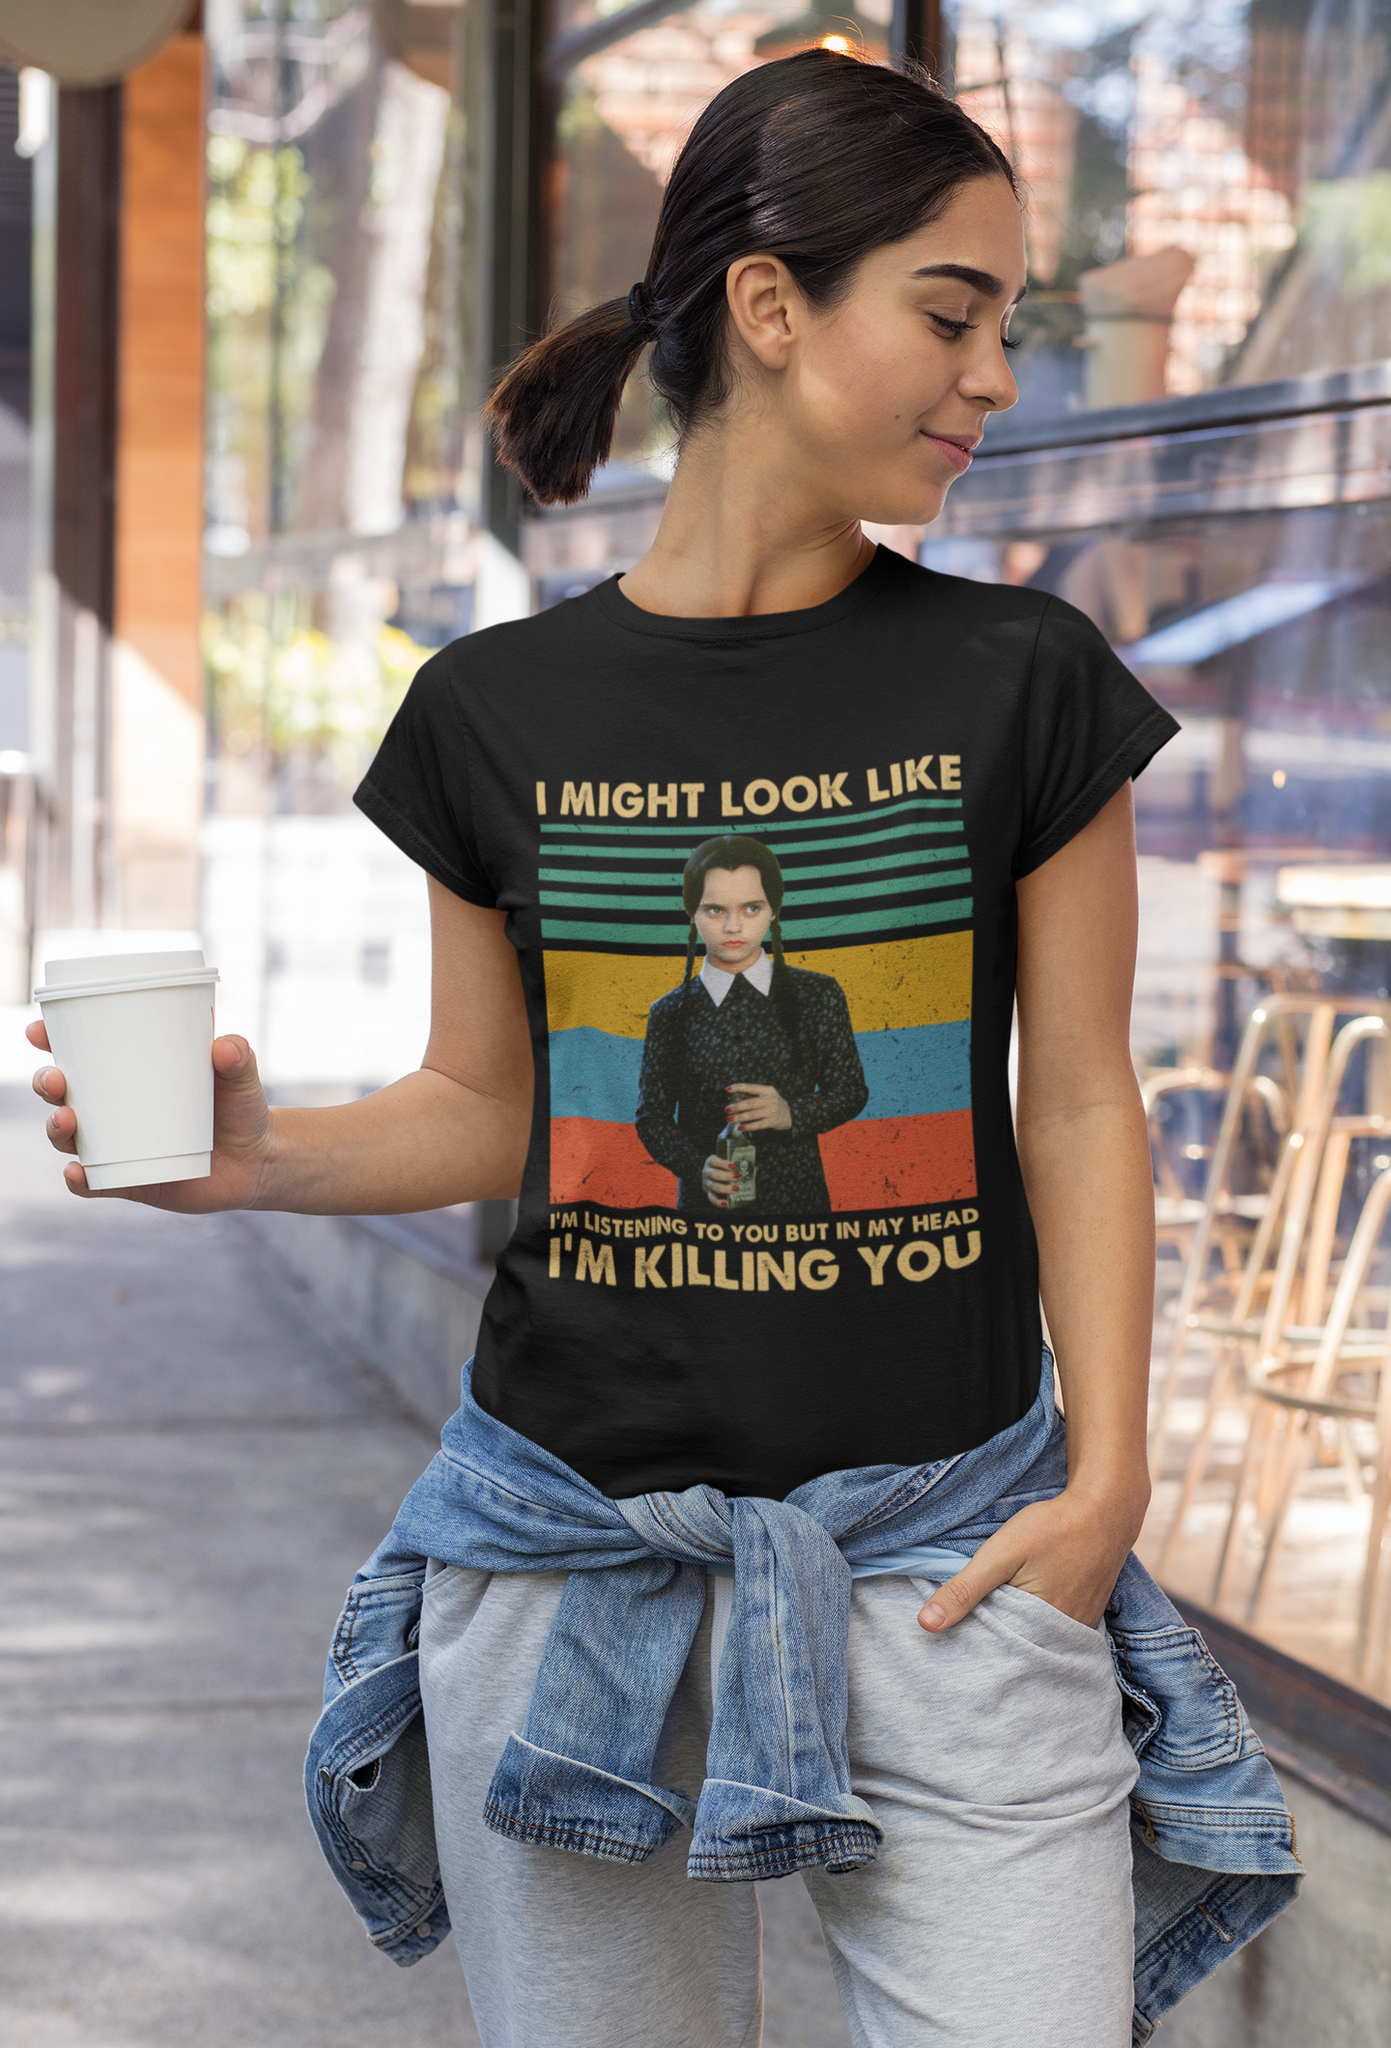 Addams Family T Shirt, Wednesday Addams T Shirt, I Might Look Like Im Listening To You But In My Head Im Killing You Tshirt